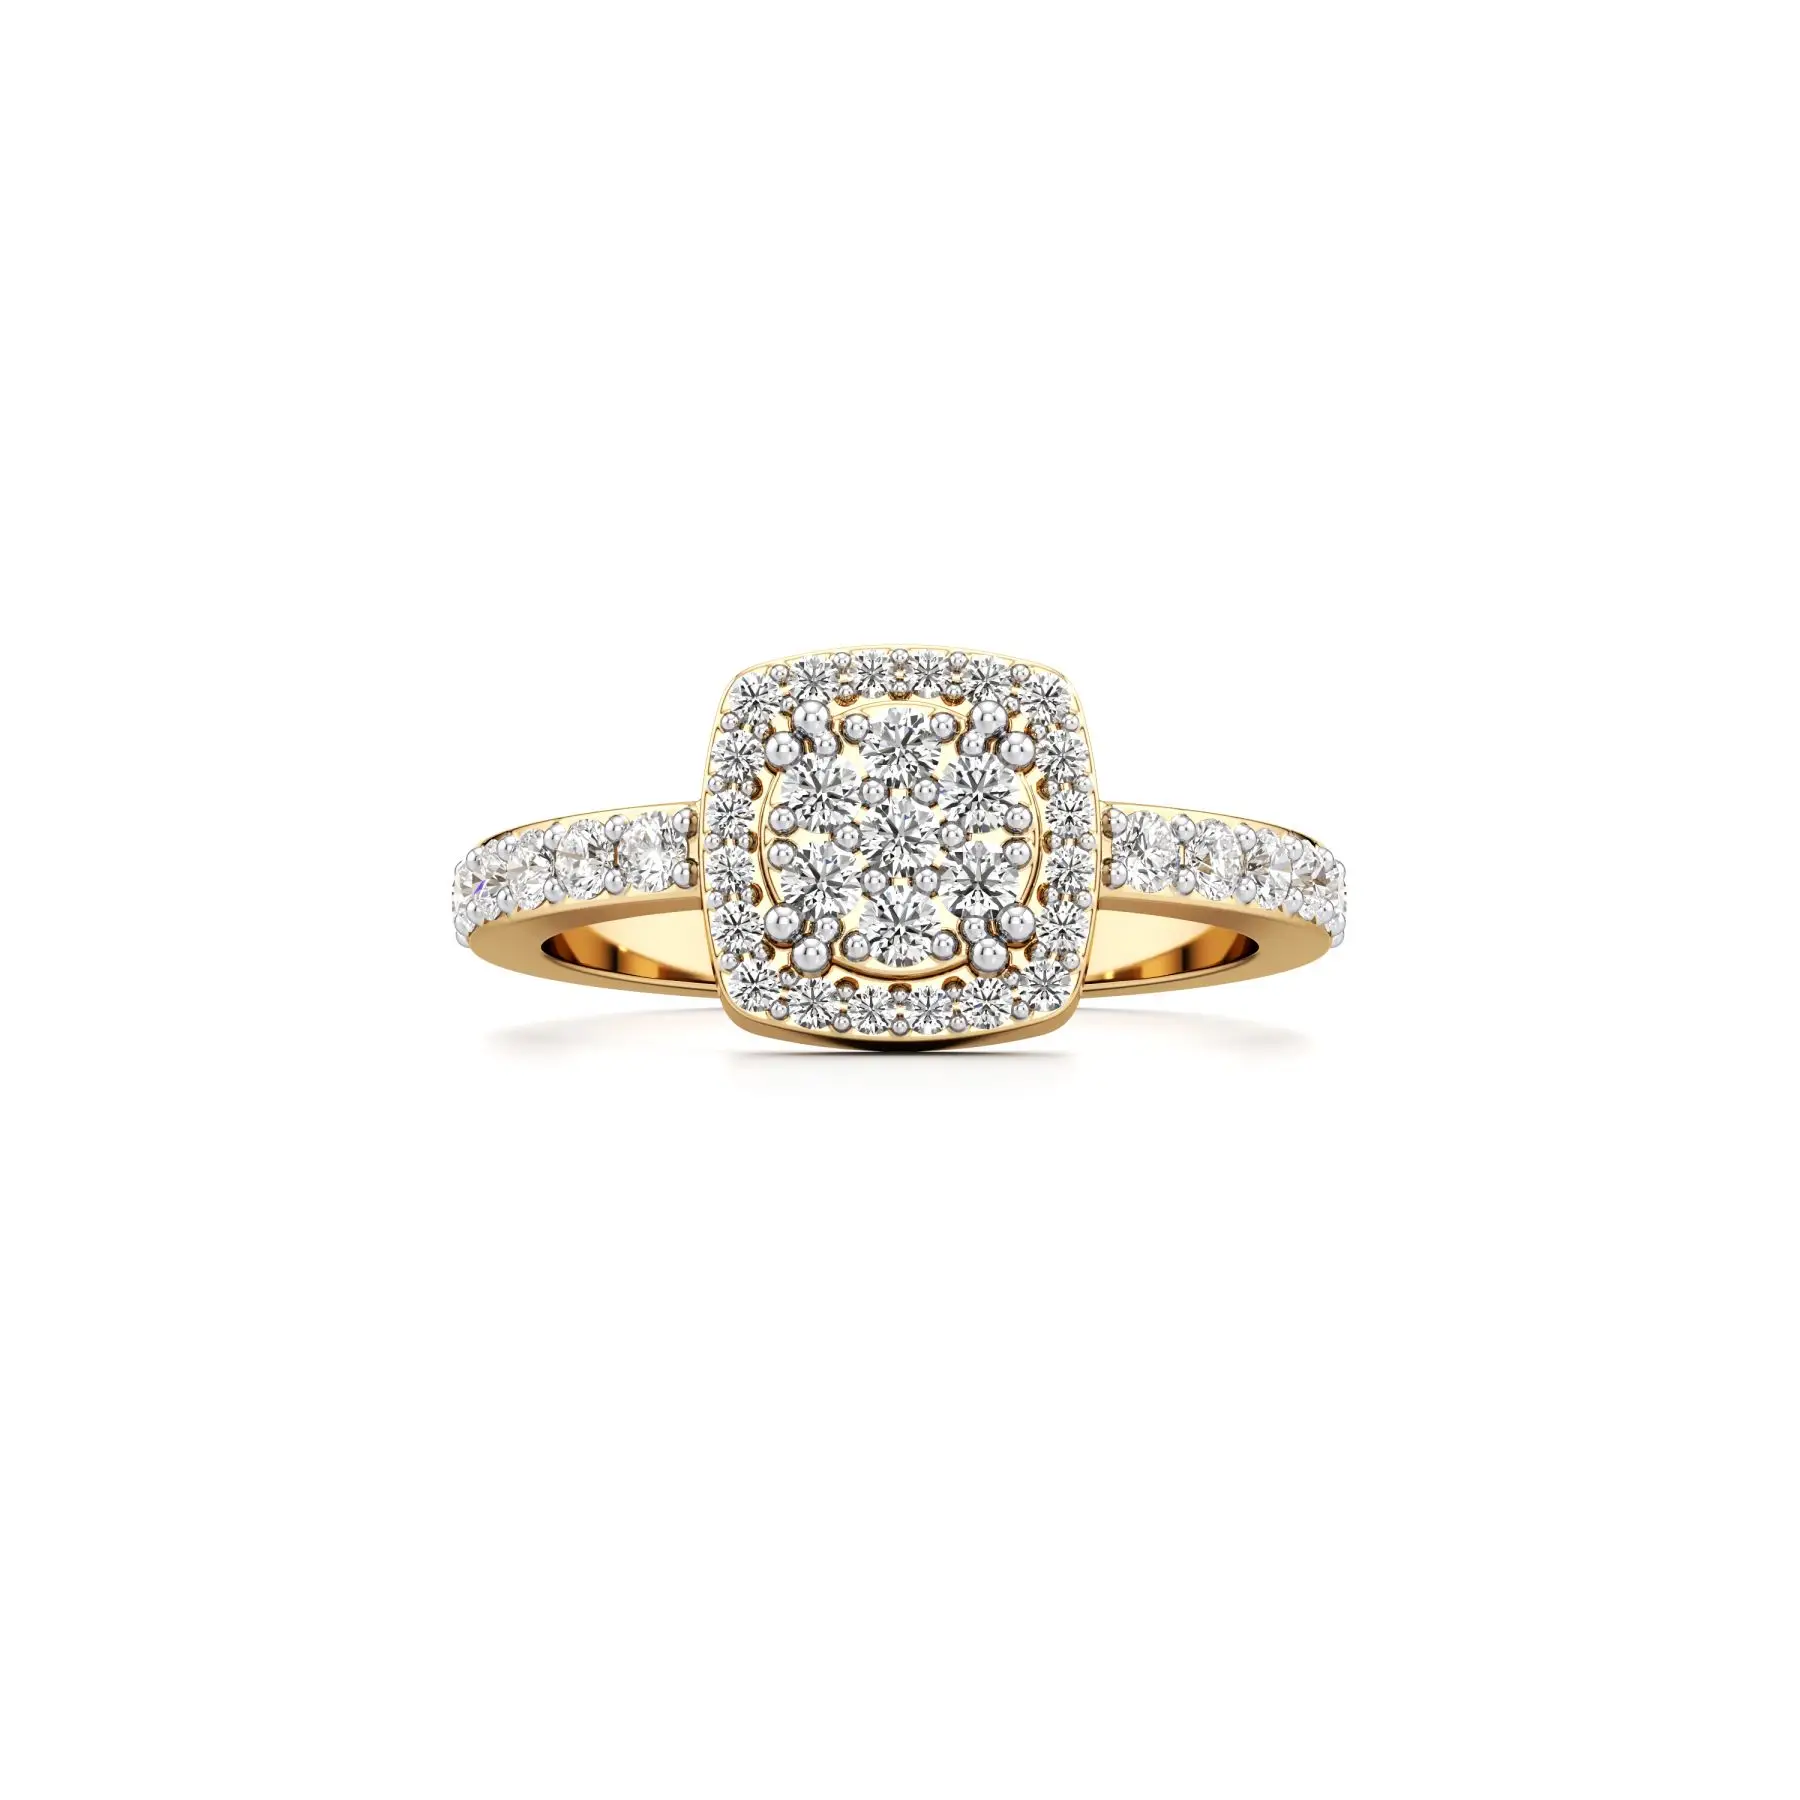 Forever Flair Diamond Ring in Yellow 10k Gold